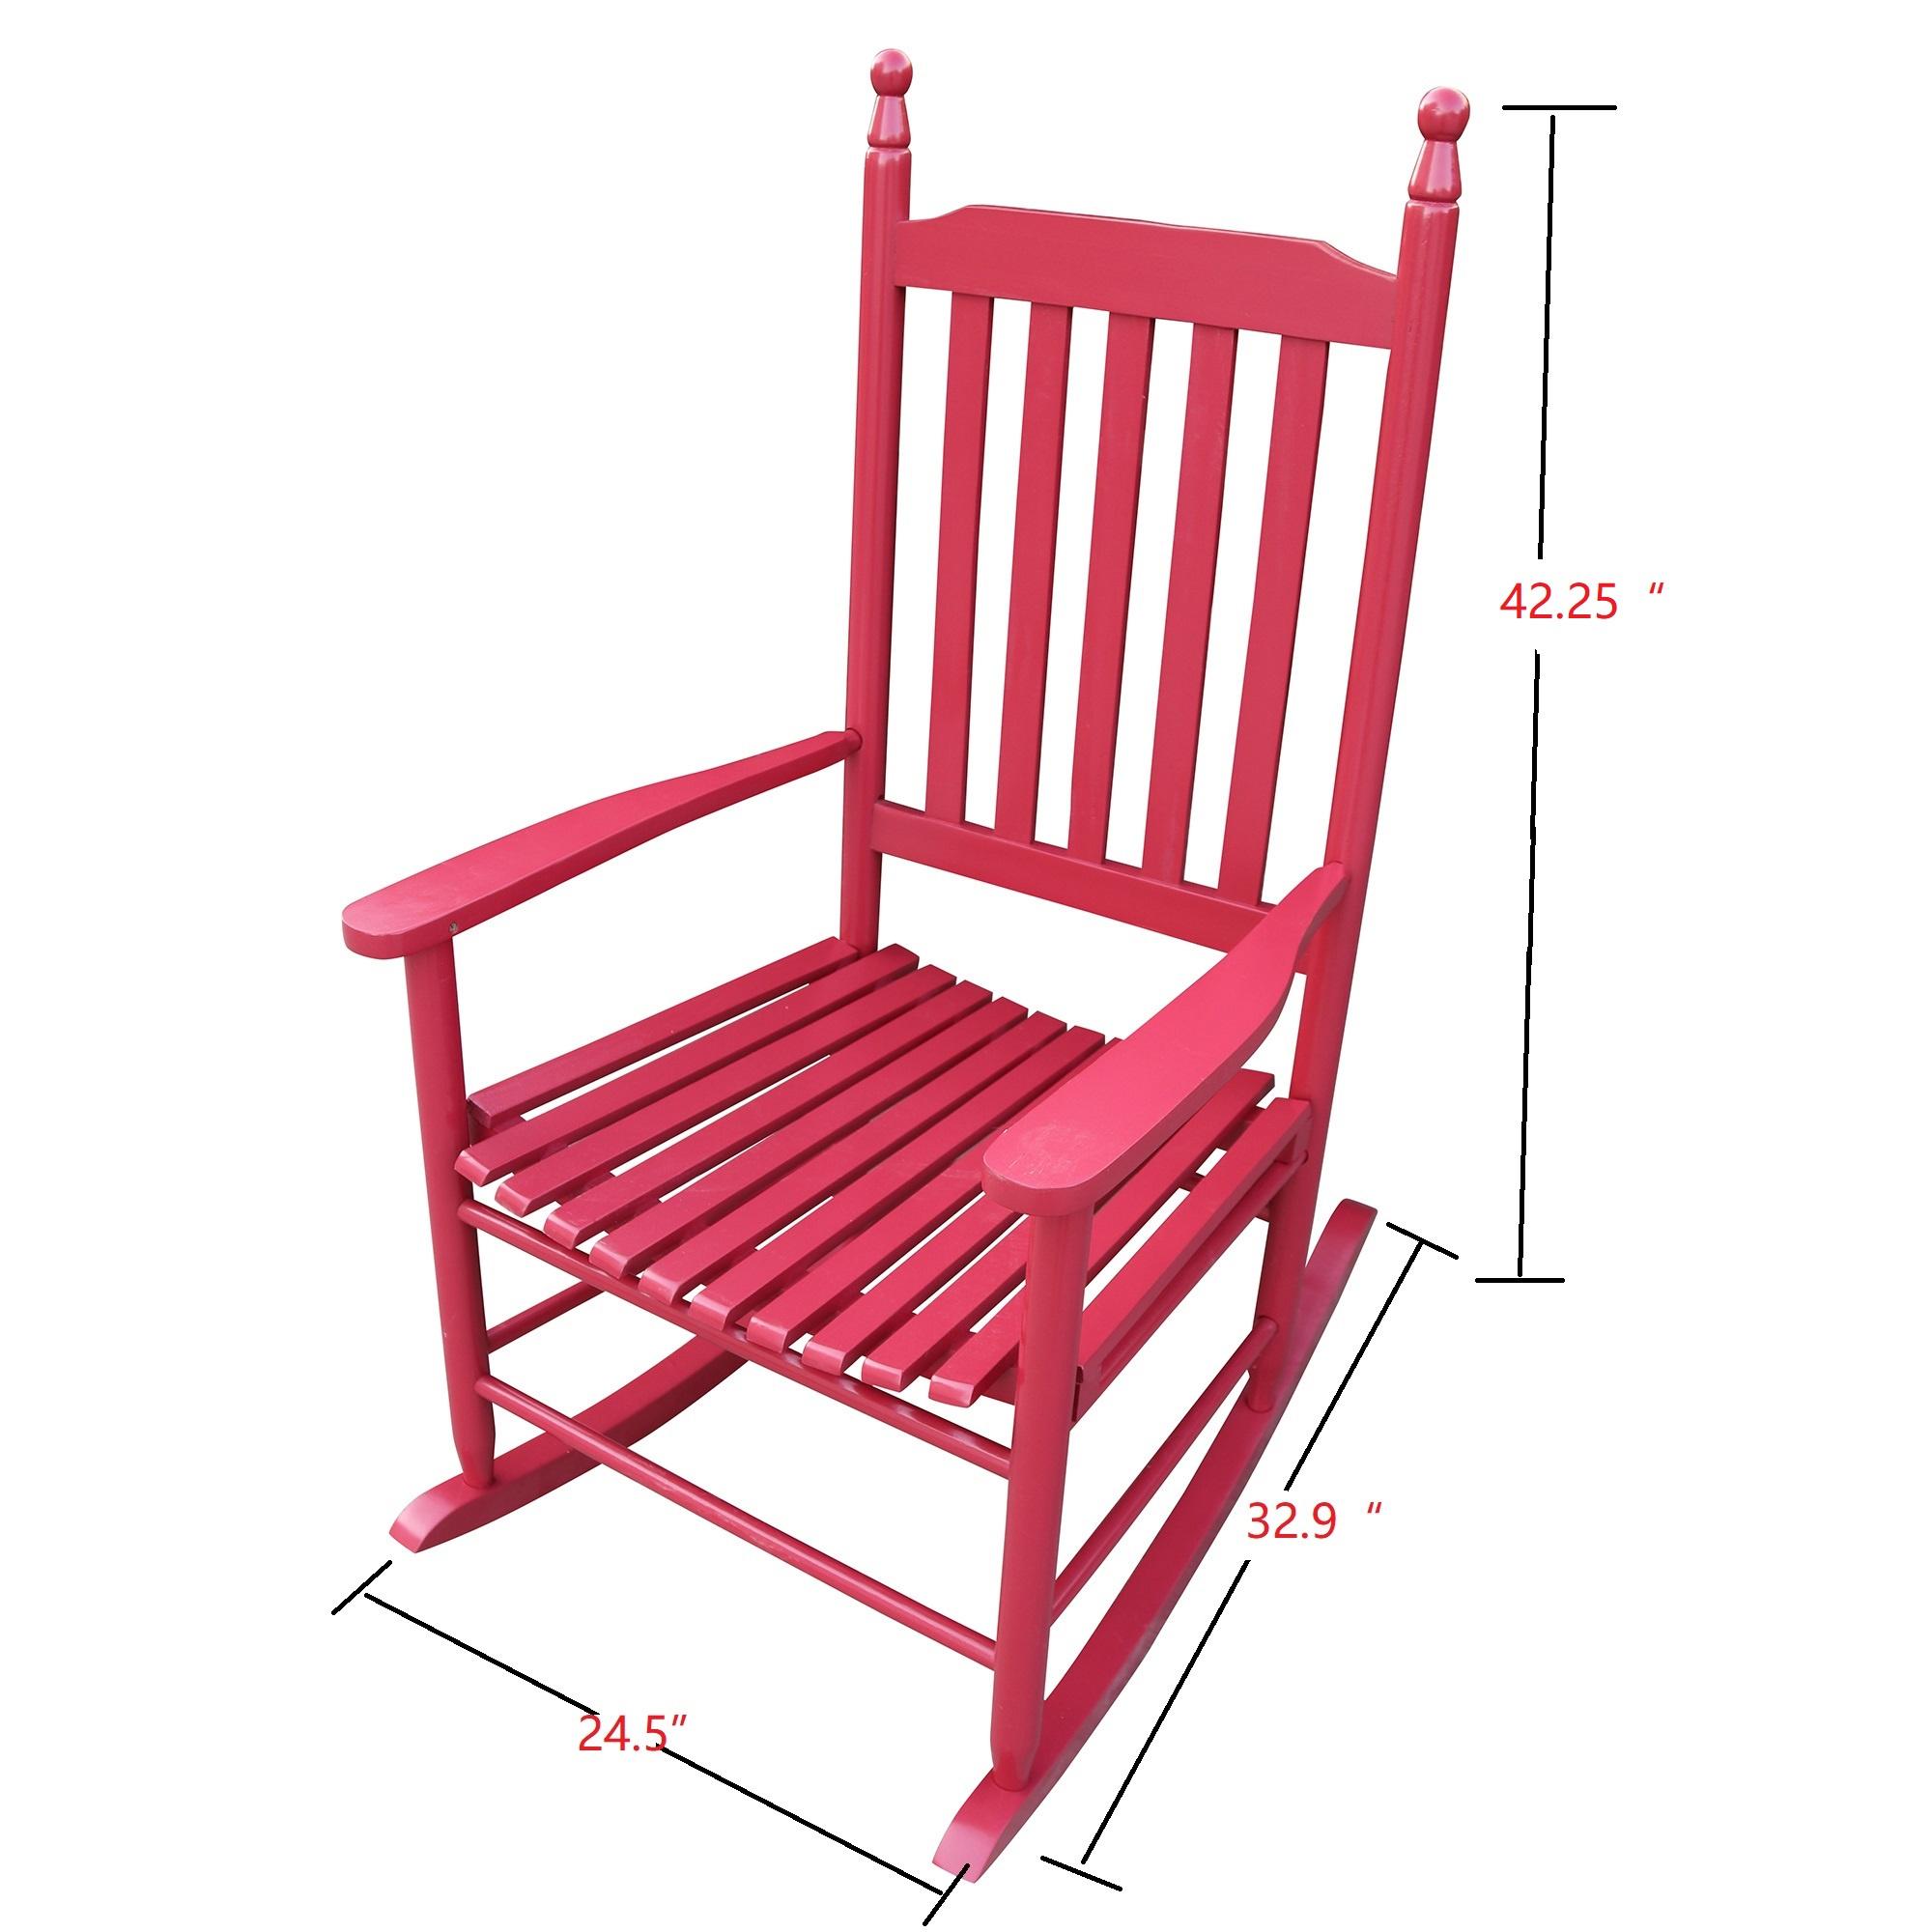 Patio Outdoor Rocking Chair, Wooden Porch Rocker Chair, Modern Leisure Ergonomic Chair with Sturdy Slatted Back Rest for Indoor Garden Lawn Deck Balcony Backyard, Supports up to 280 LBS, Red - image 3 of 7